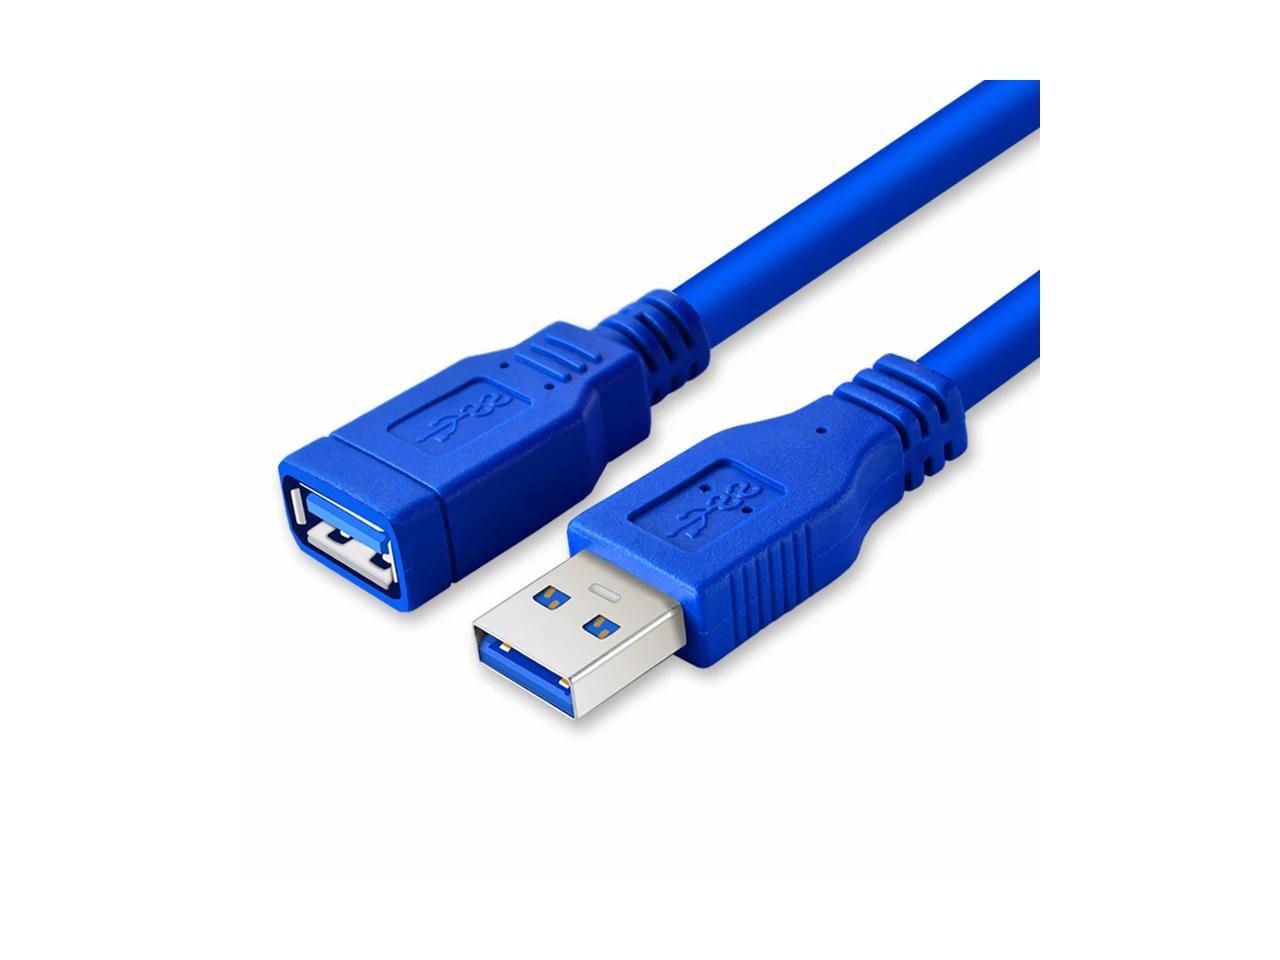 USB 3.0 Cable Suitable for Smart TV PS4 Xbox One SSD USB3.0 to Extender Data Cord Mini USB Extension Cable LYY USB Extension Cable 